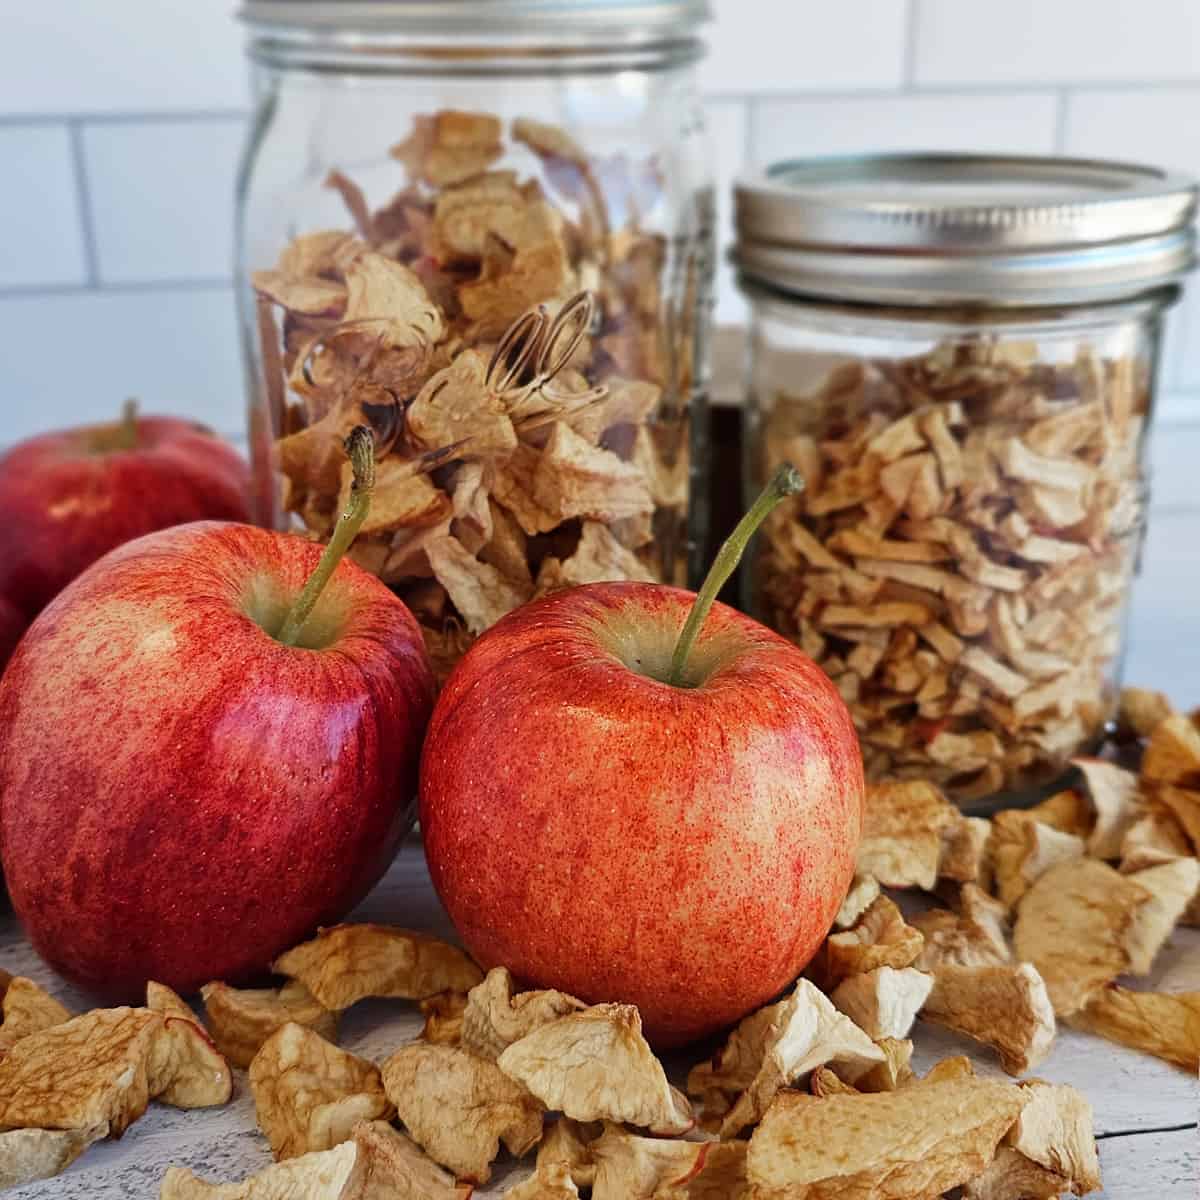 Apple chips in jars and apples on a table.